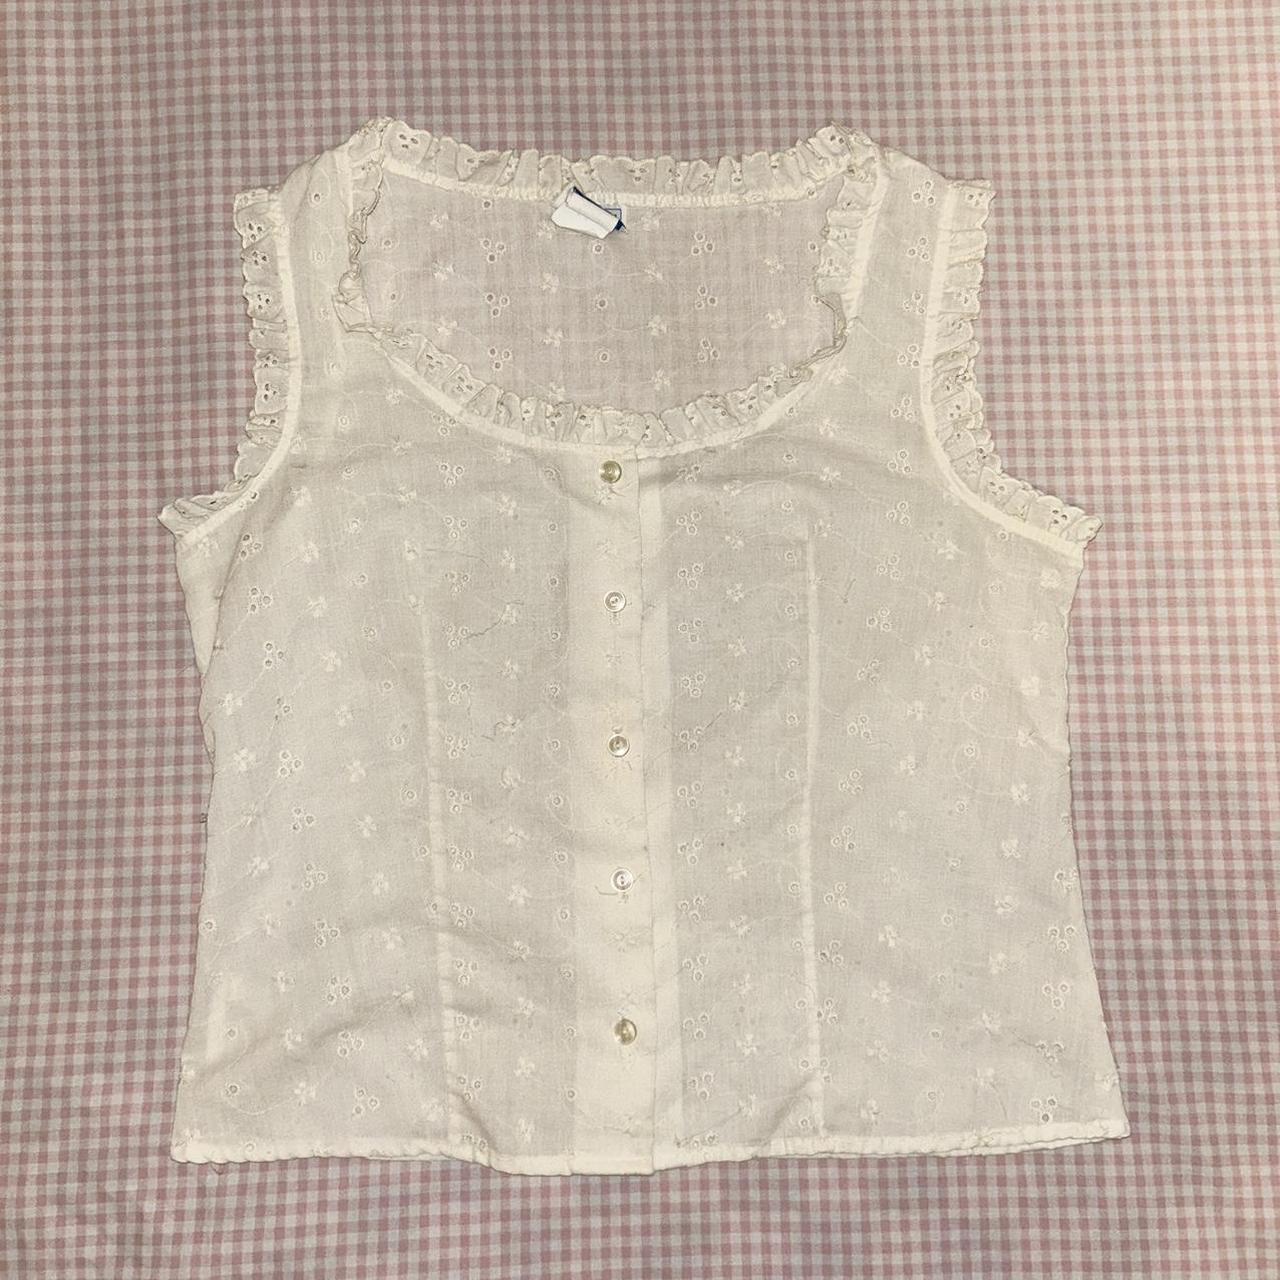 Tweed-like #milkmaid bow ribbon lace cami top from - Depop